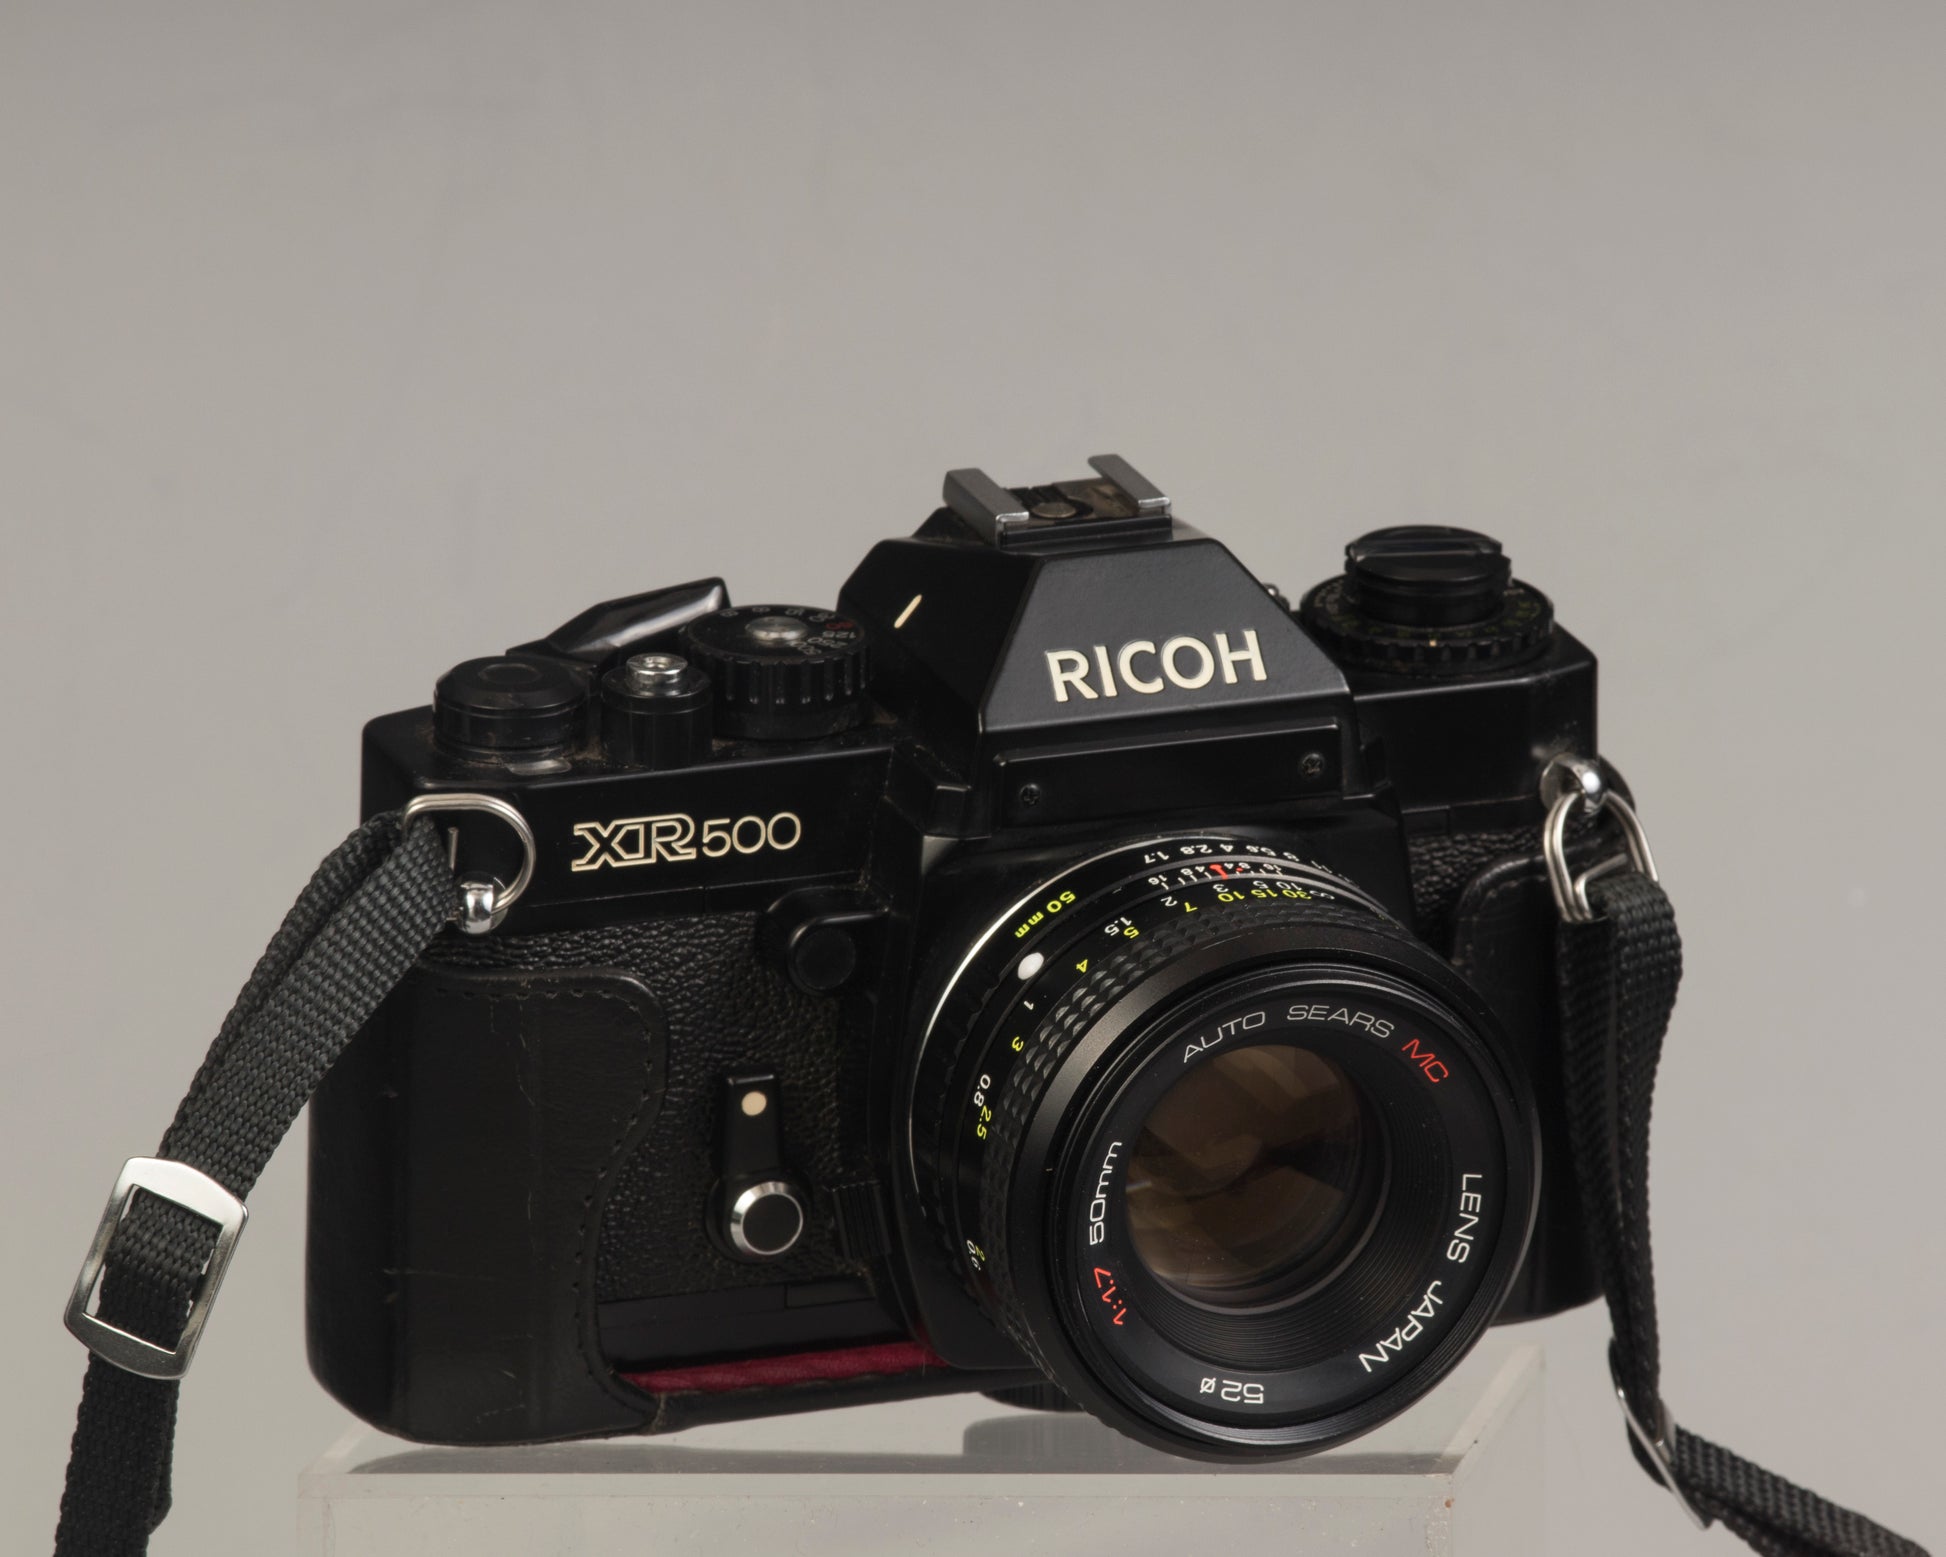 Ricoh XR-500 (aka KR-5) with Auto Sears MC 50mm f1.7 (a rebranded Ricoh lens); in half-case